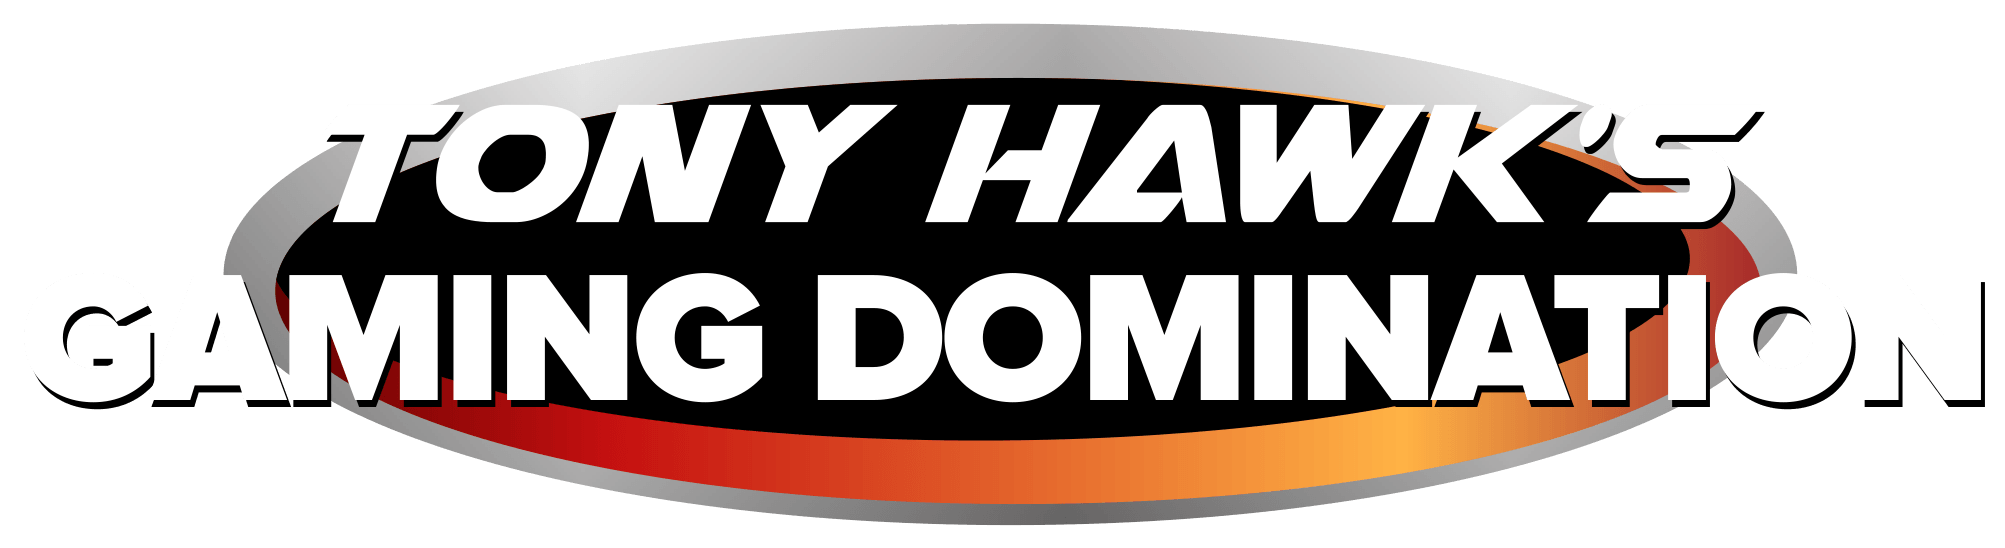 Domination Logo - Tony Hawk's Gaming Domination - The Rise And Downfall Of The Hawk ...